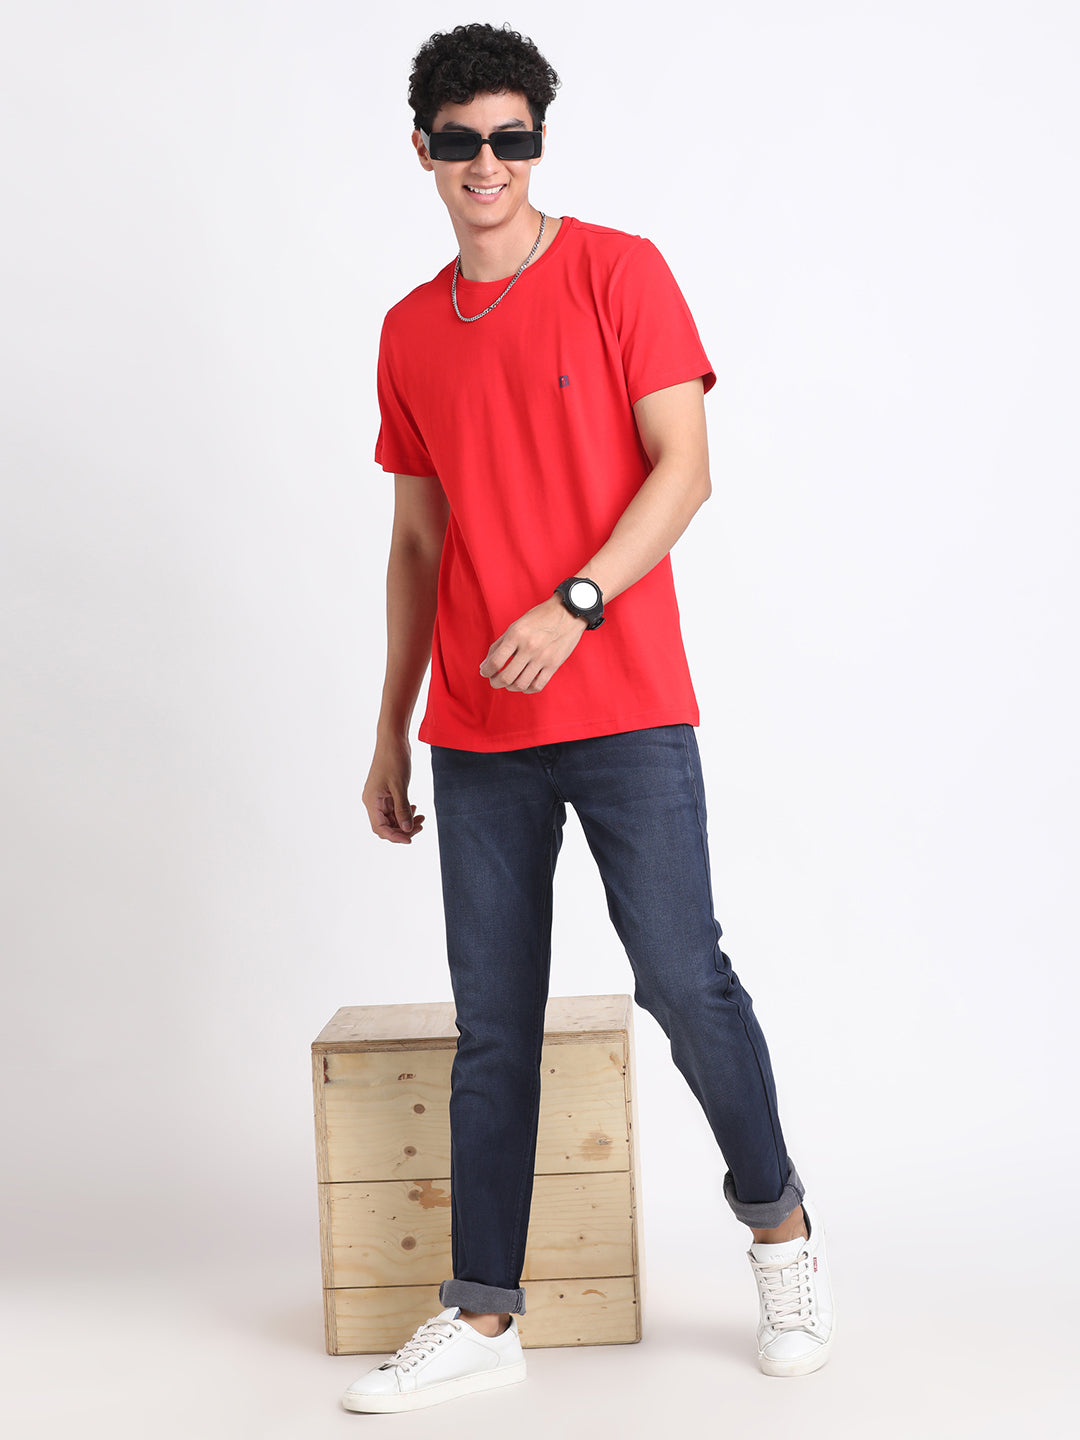 Essential 100% Cotton Red Solid Round Neck Half Sleeve Casual T-Shirt